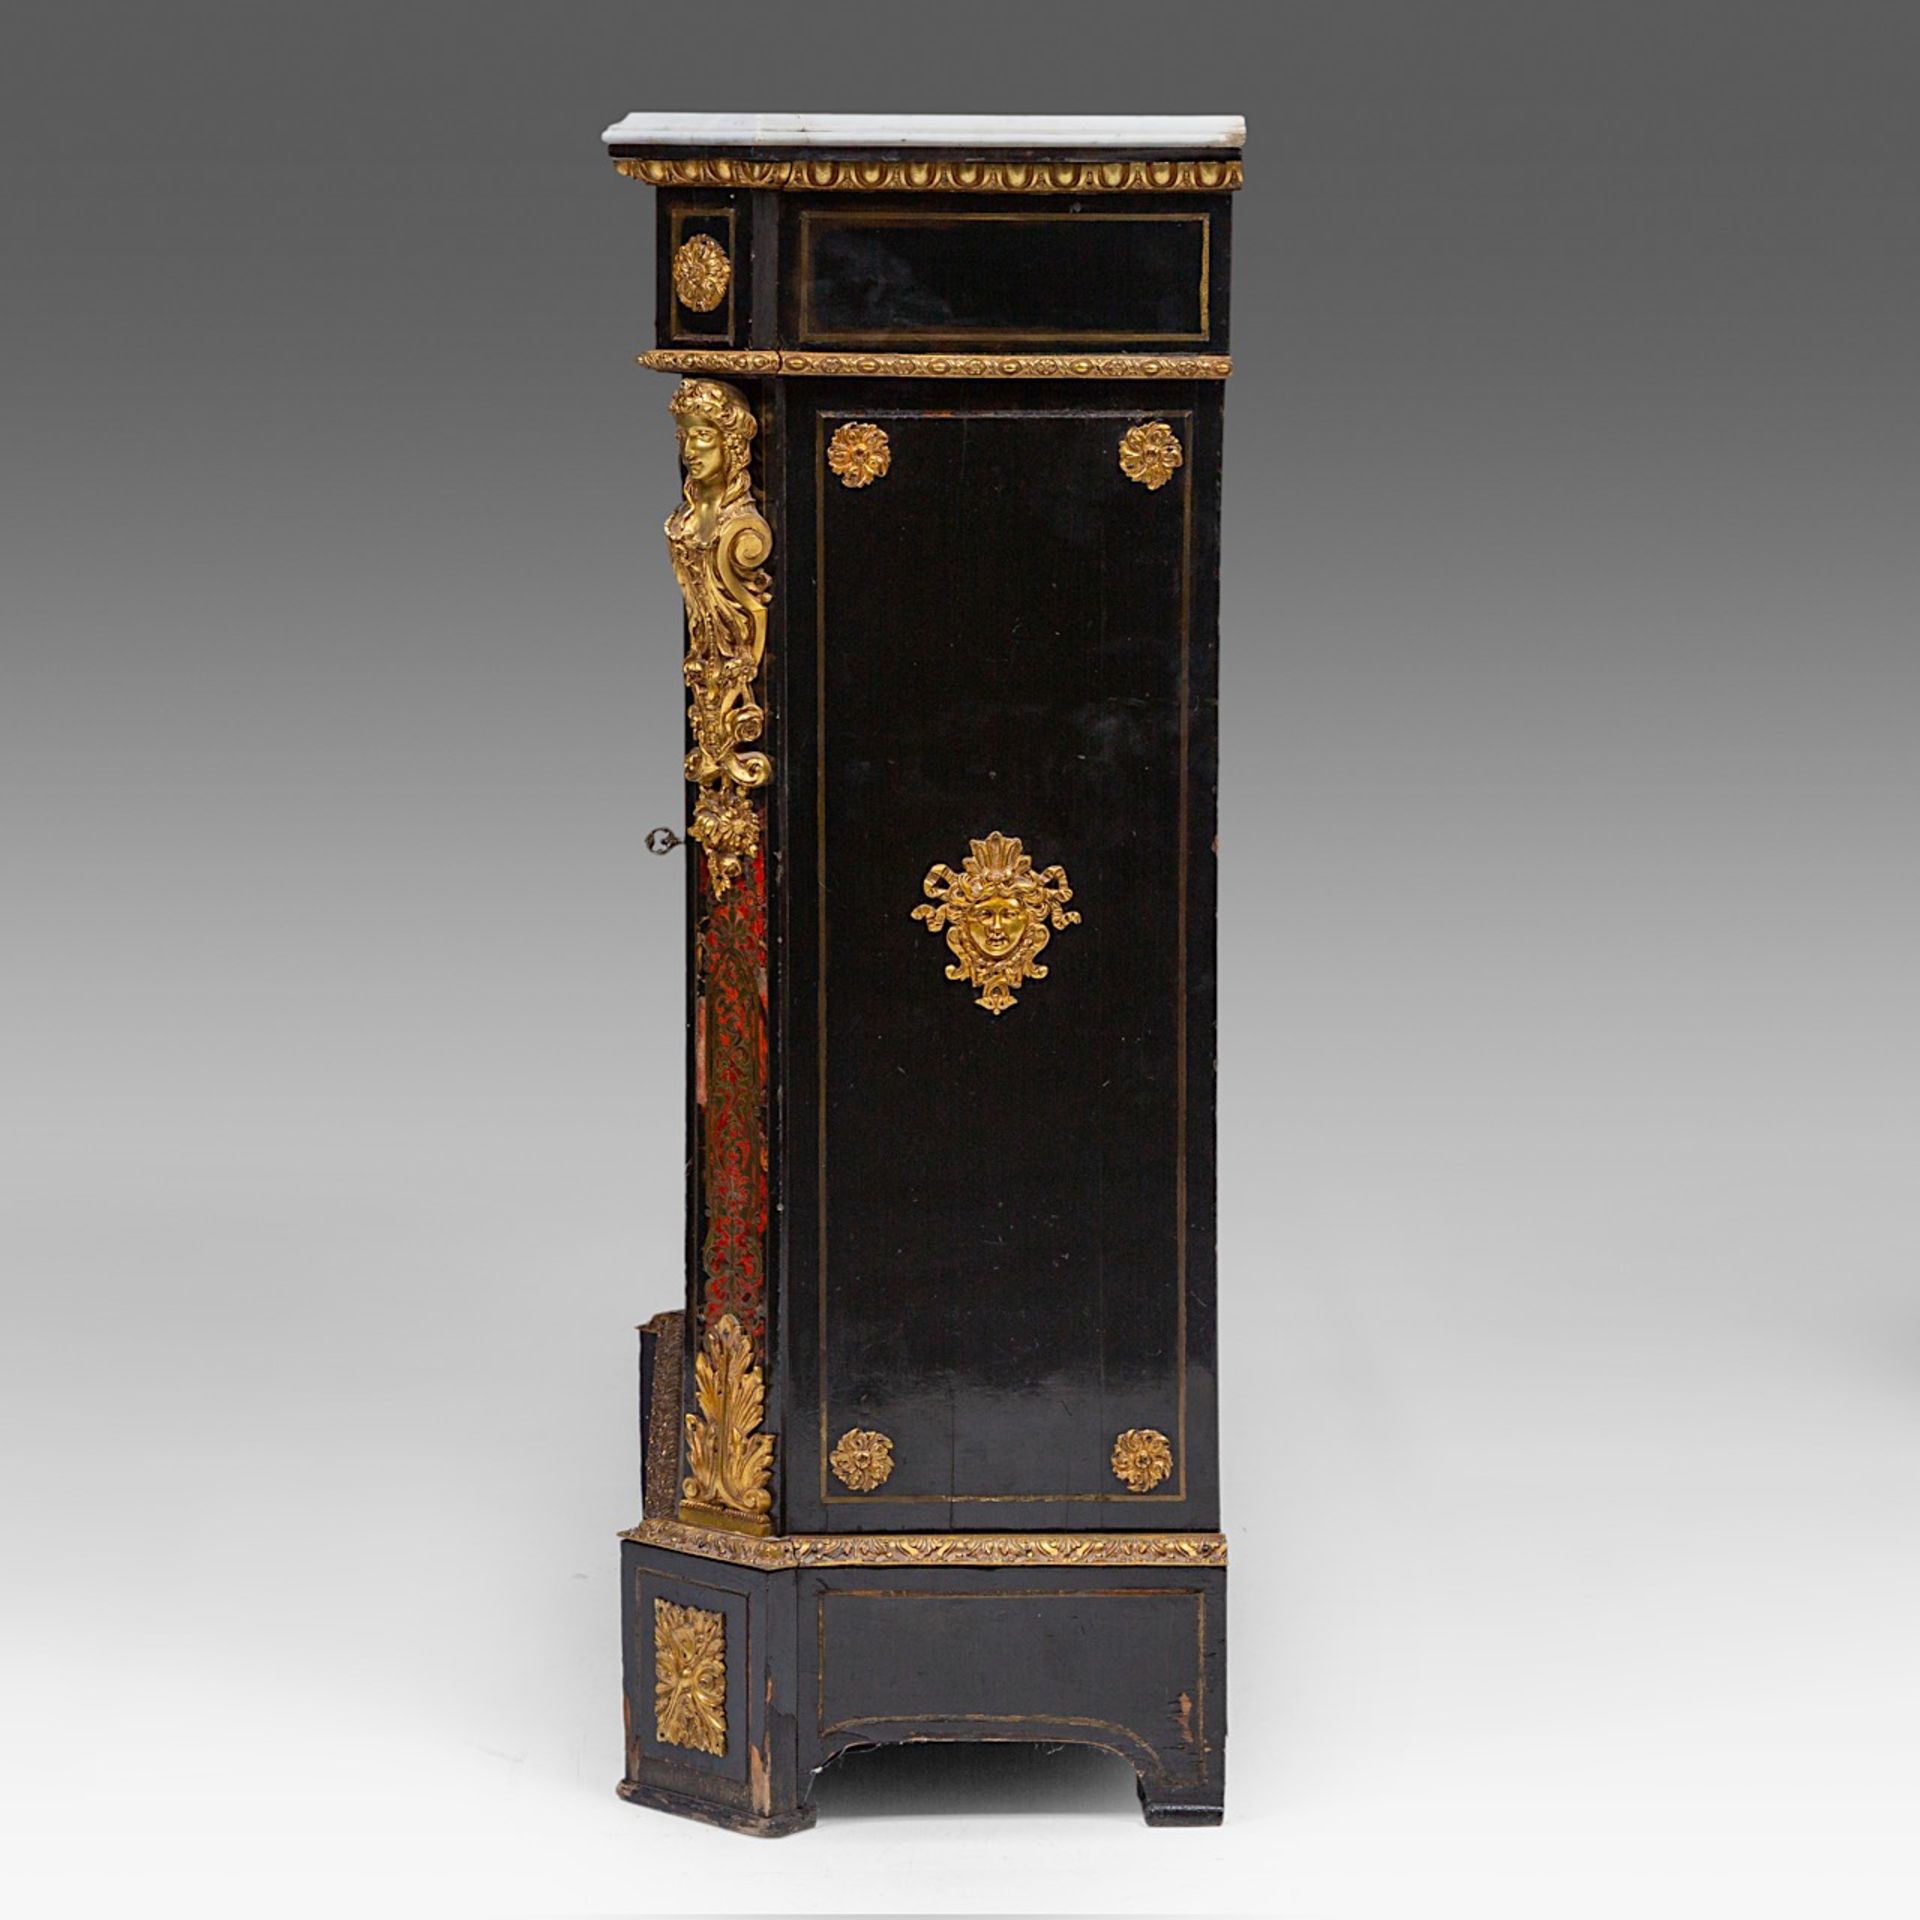 A Napoleon III (1852-1870) Boulle work display cabinet with gilt bronze mounts and marble top, H 112 - Image 5 of 6